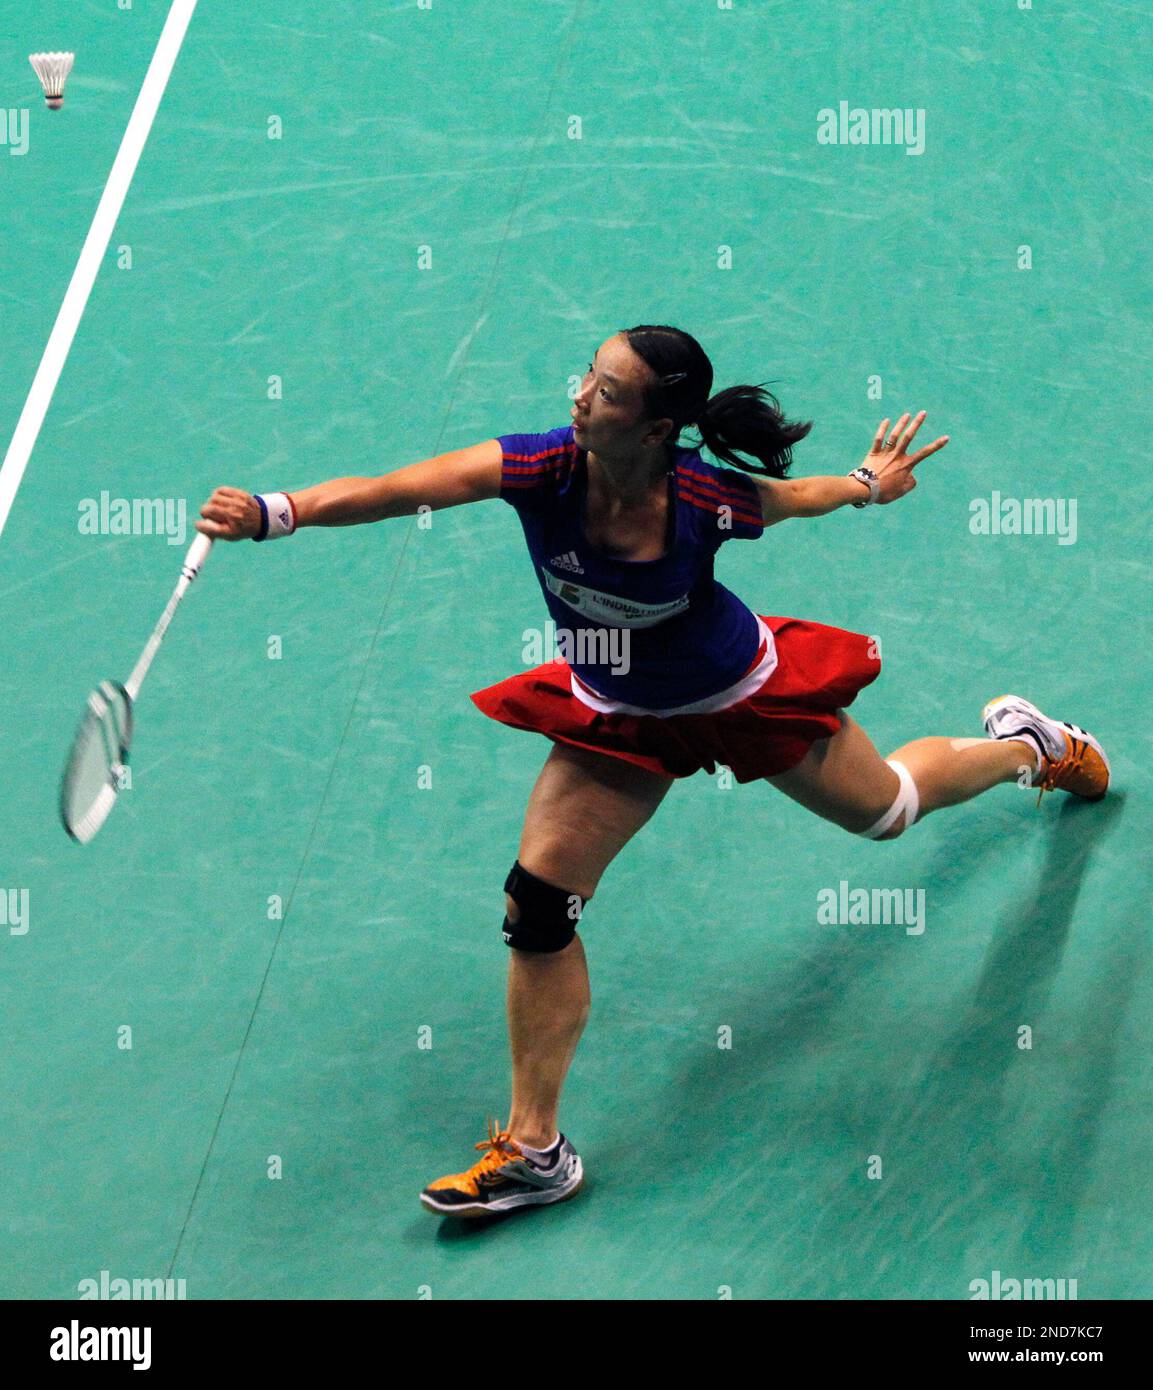 Hongyan Pi of France returns a shot against Xin Wang of China during their womens single quarterfinal match at the World Badminton Championships in Paris, Friday Aug